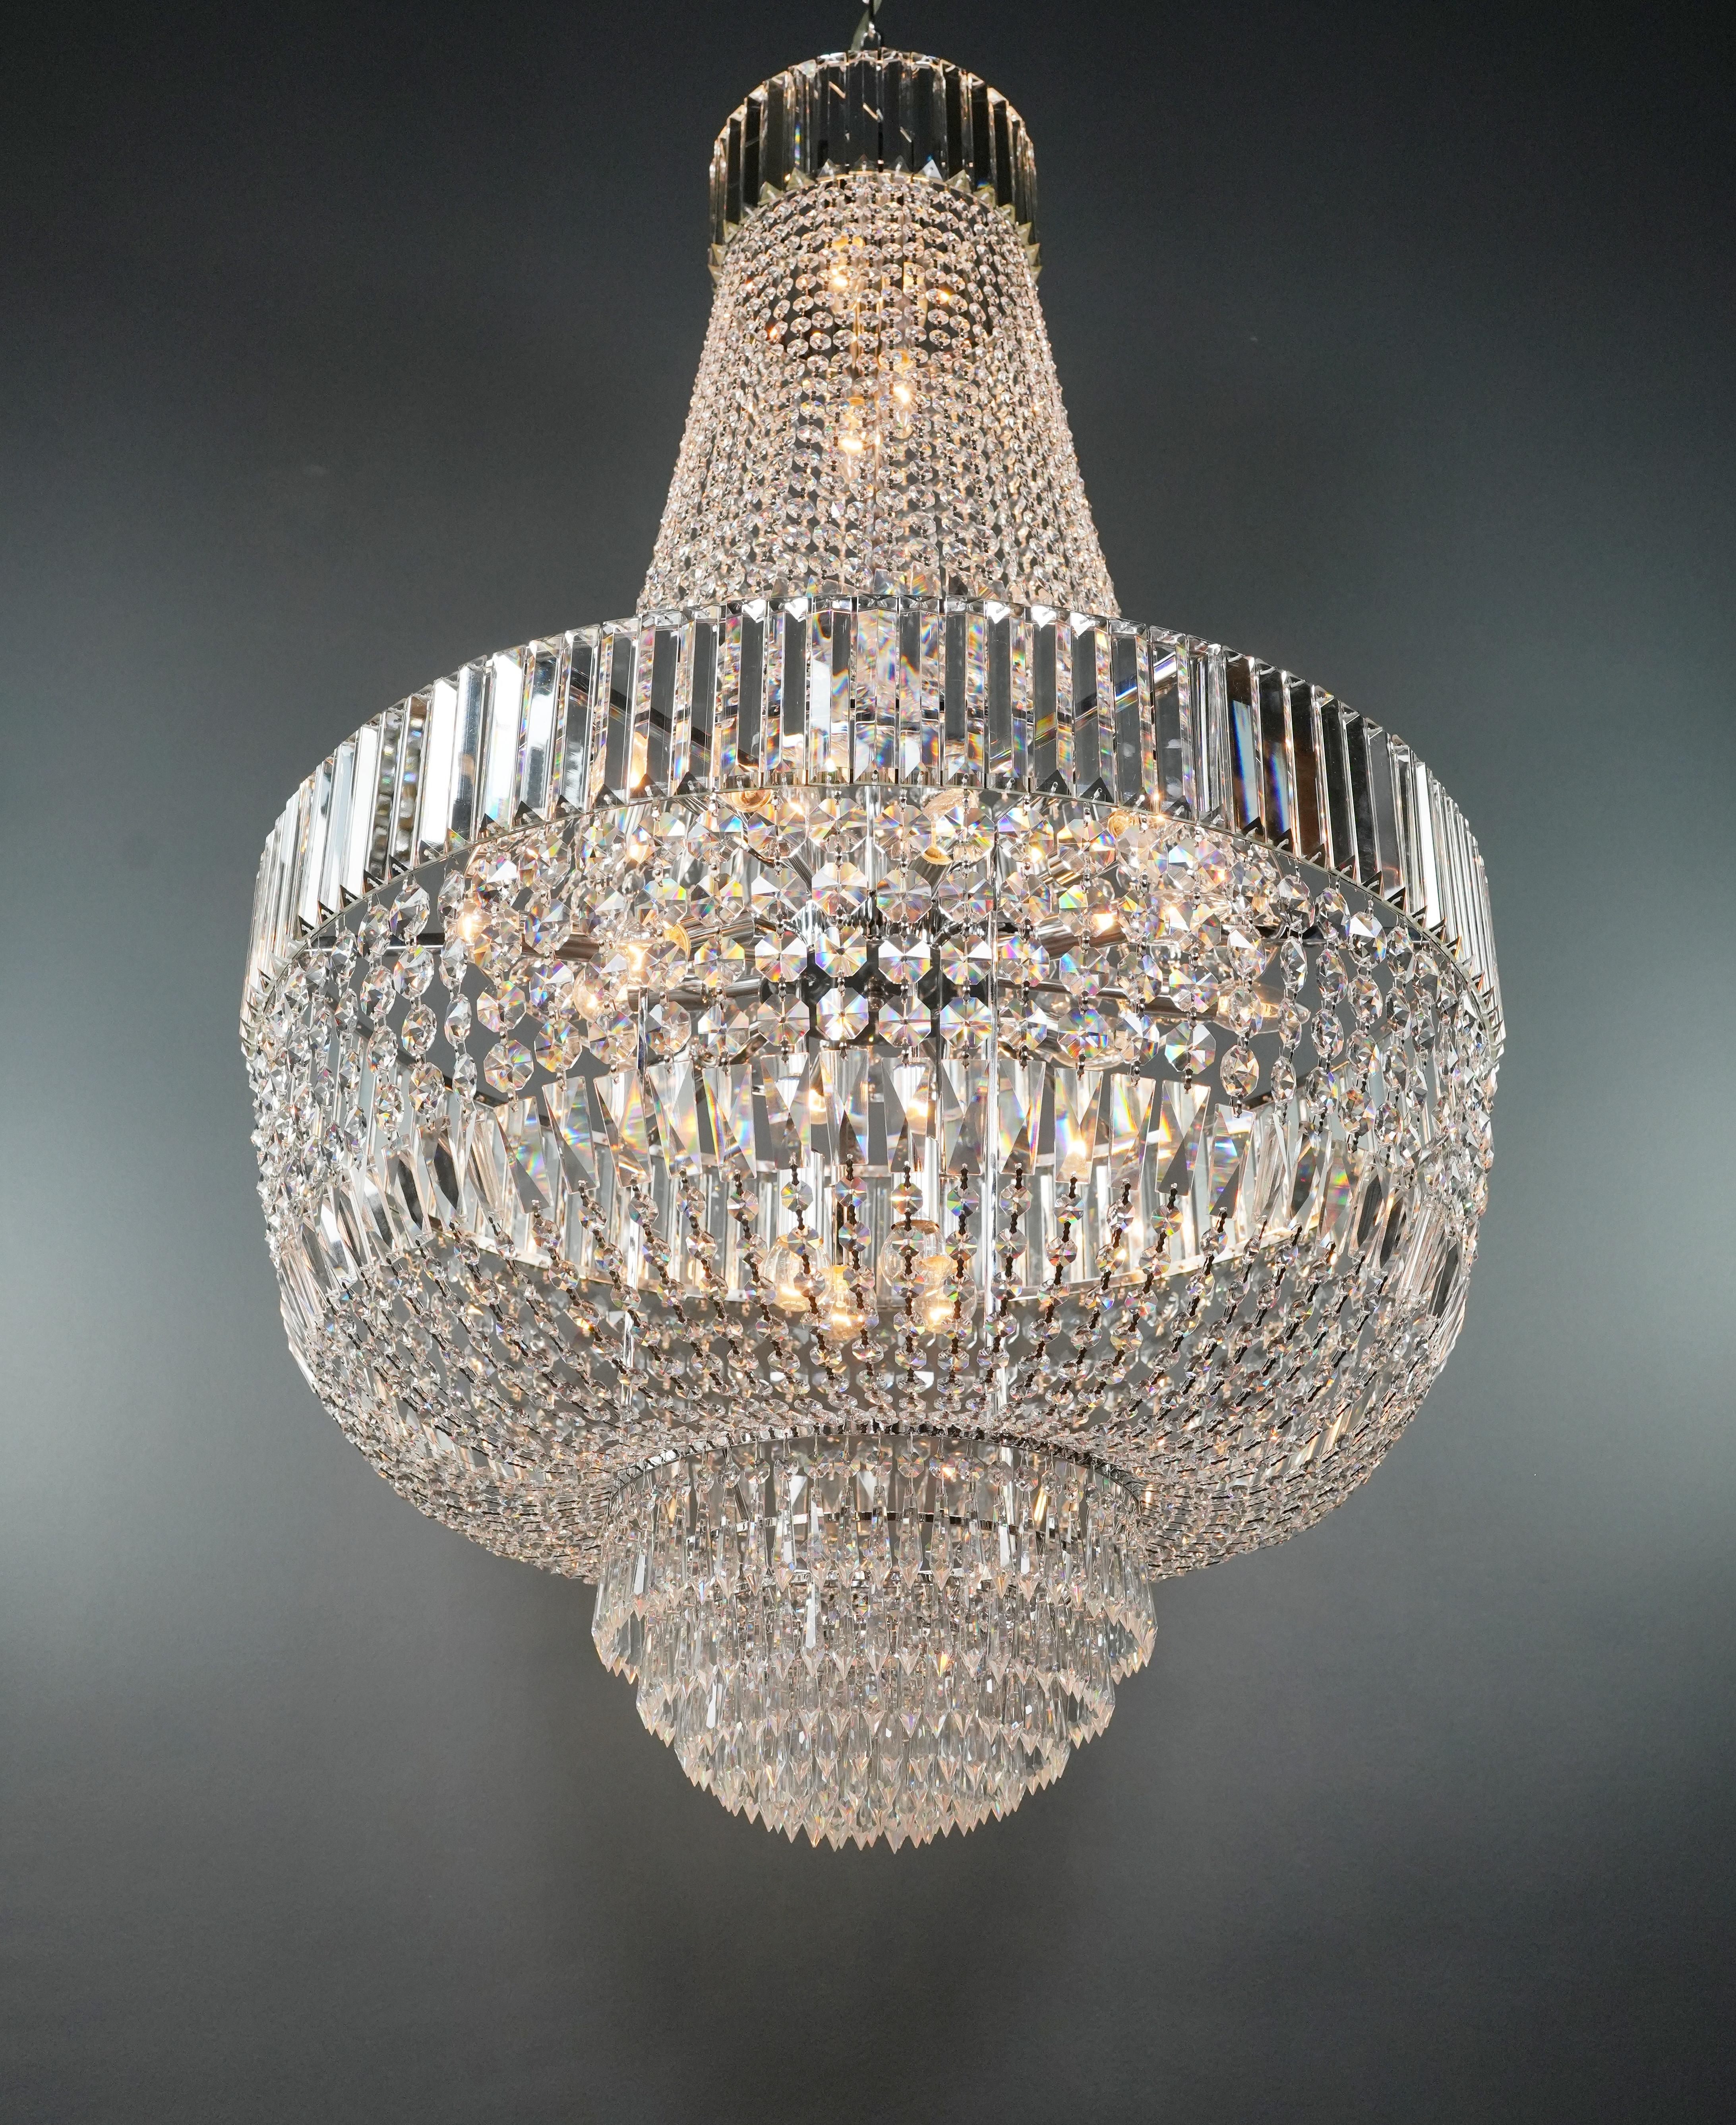 Art Deco Style Crystal Chandelier Empire Sac a Pearl Palace Lamp Chrome In New Condition For Sale In Berlin, DE